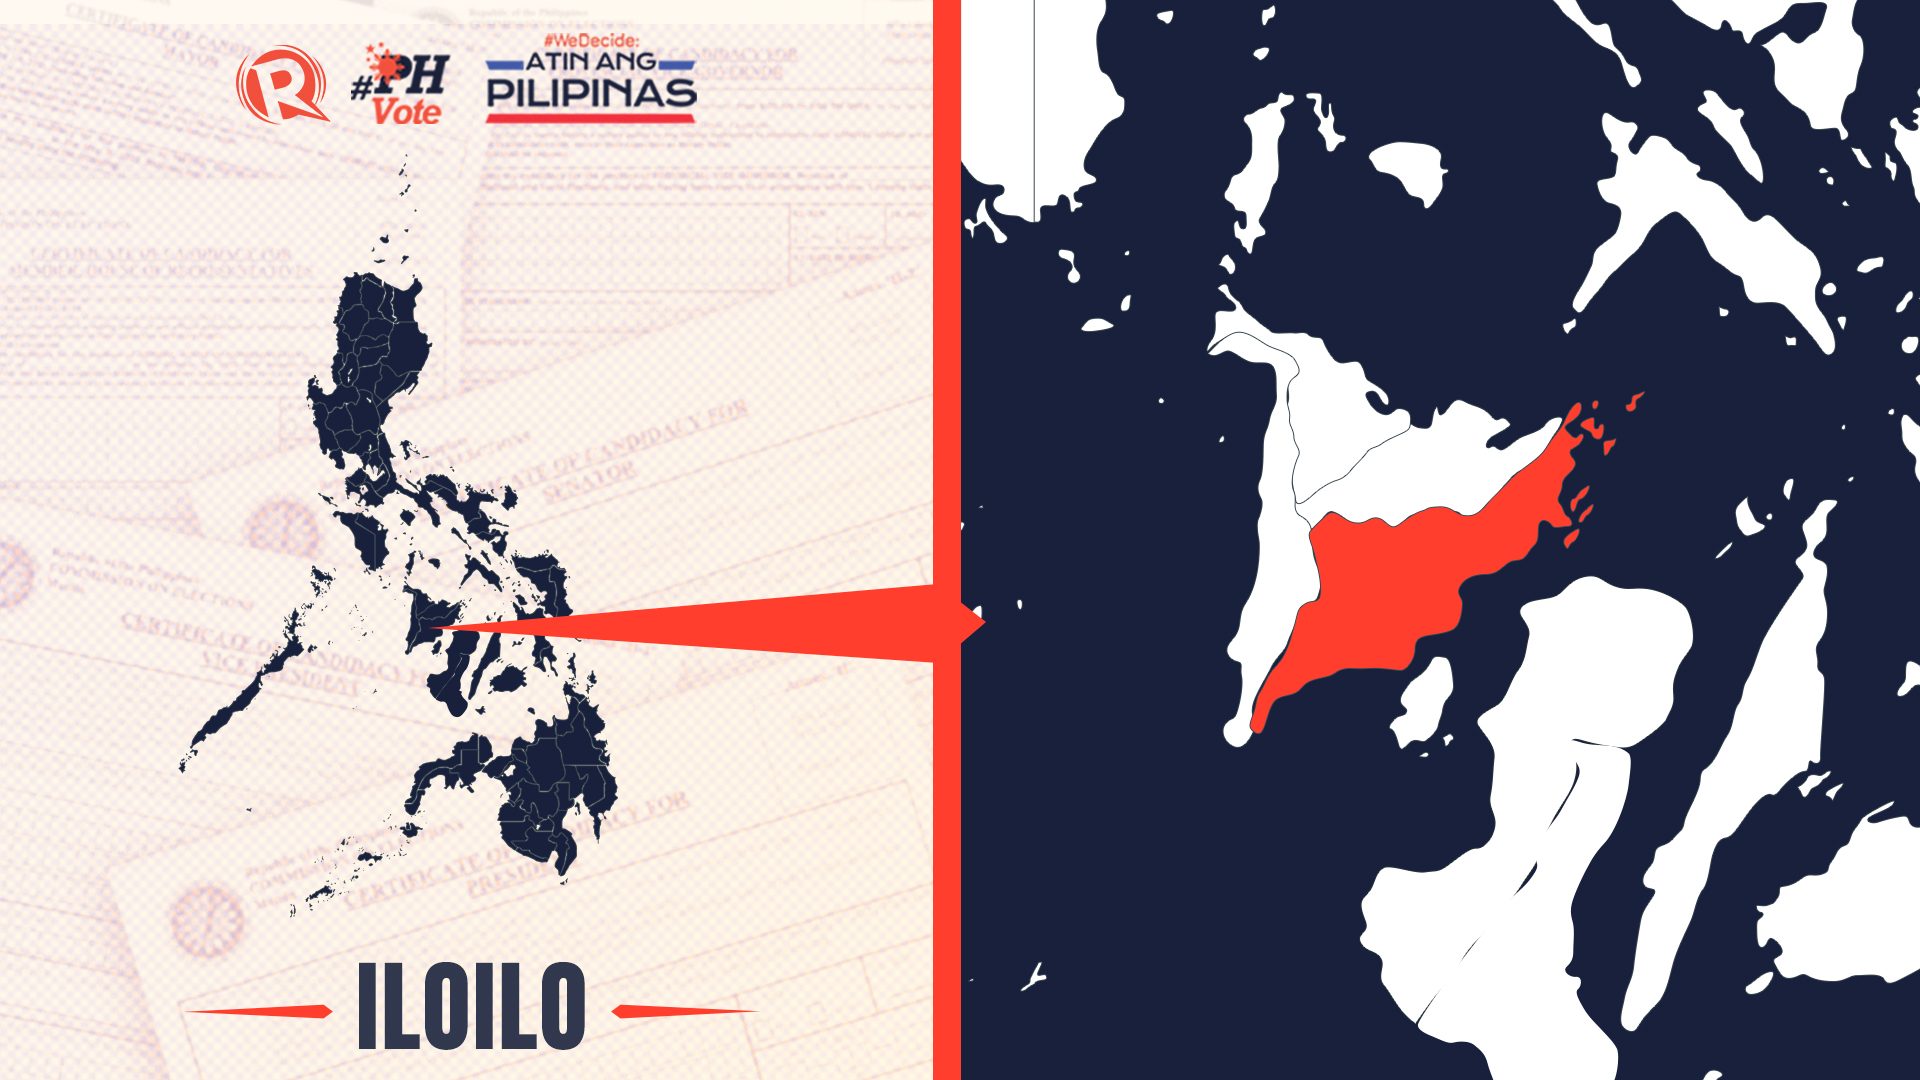 LIST: Who is running in Iloilo in the 2022 Philippine elections?